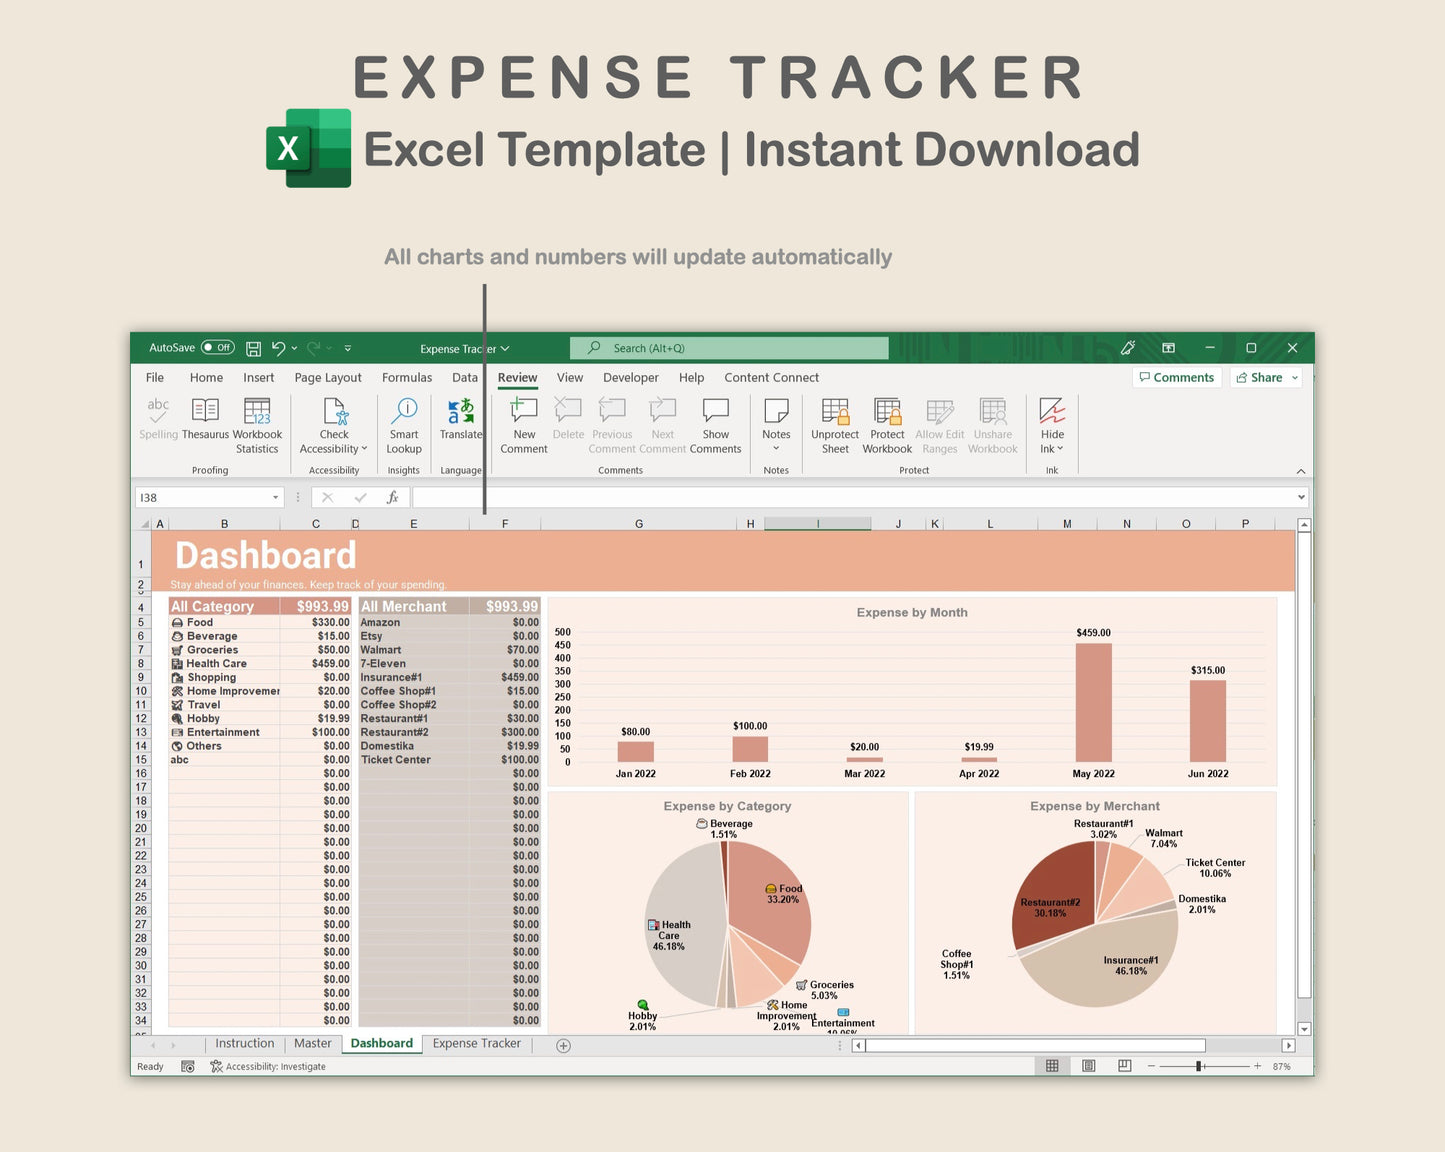 Excel - Expense Tracker - Neutral